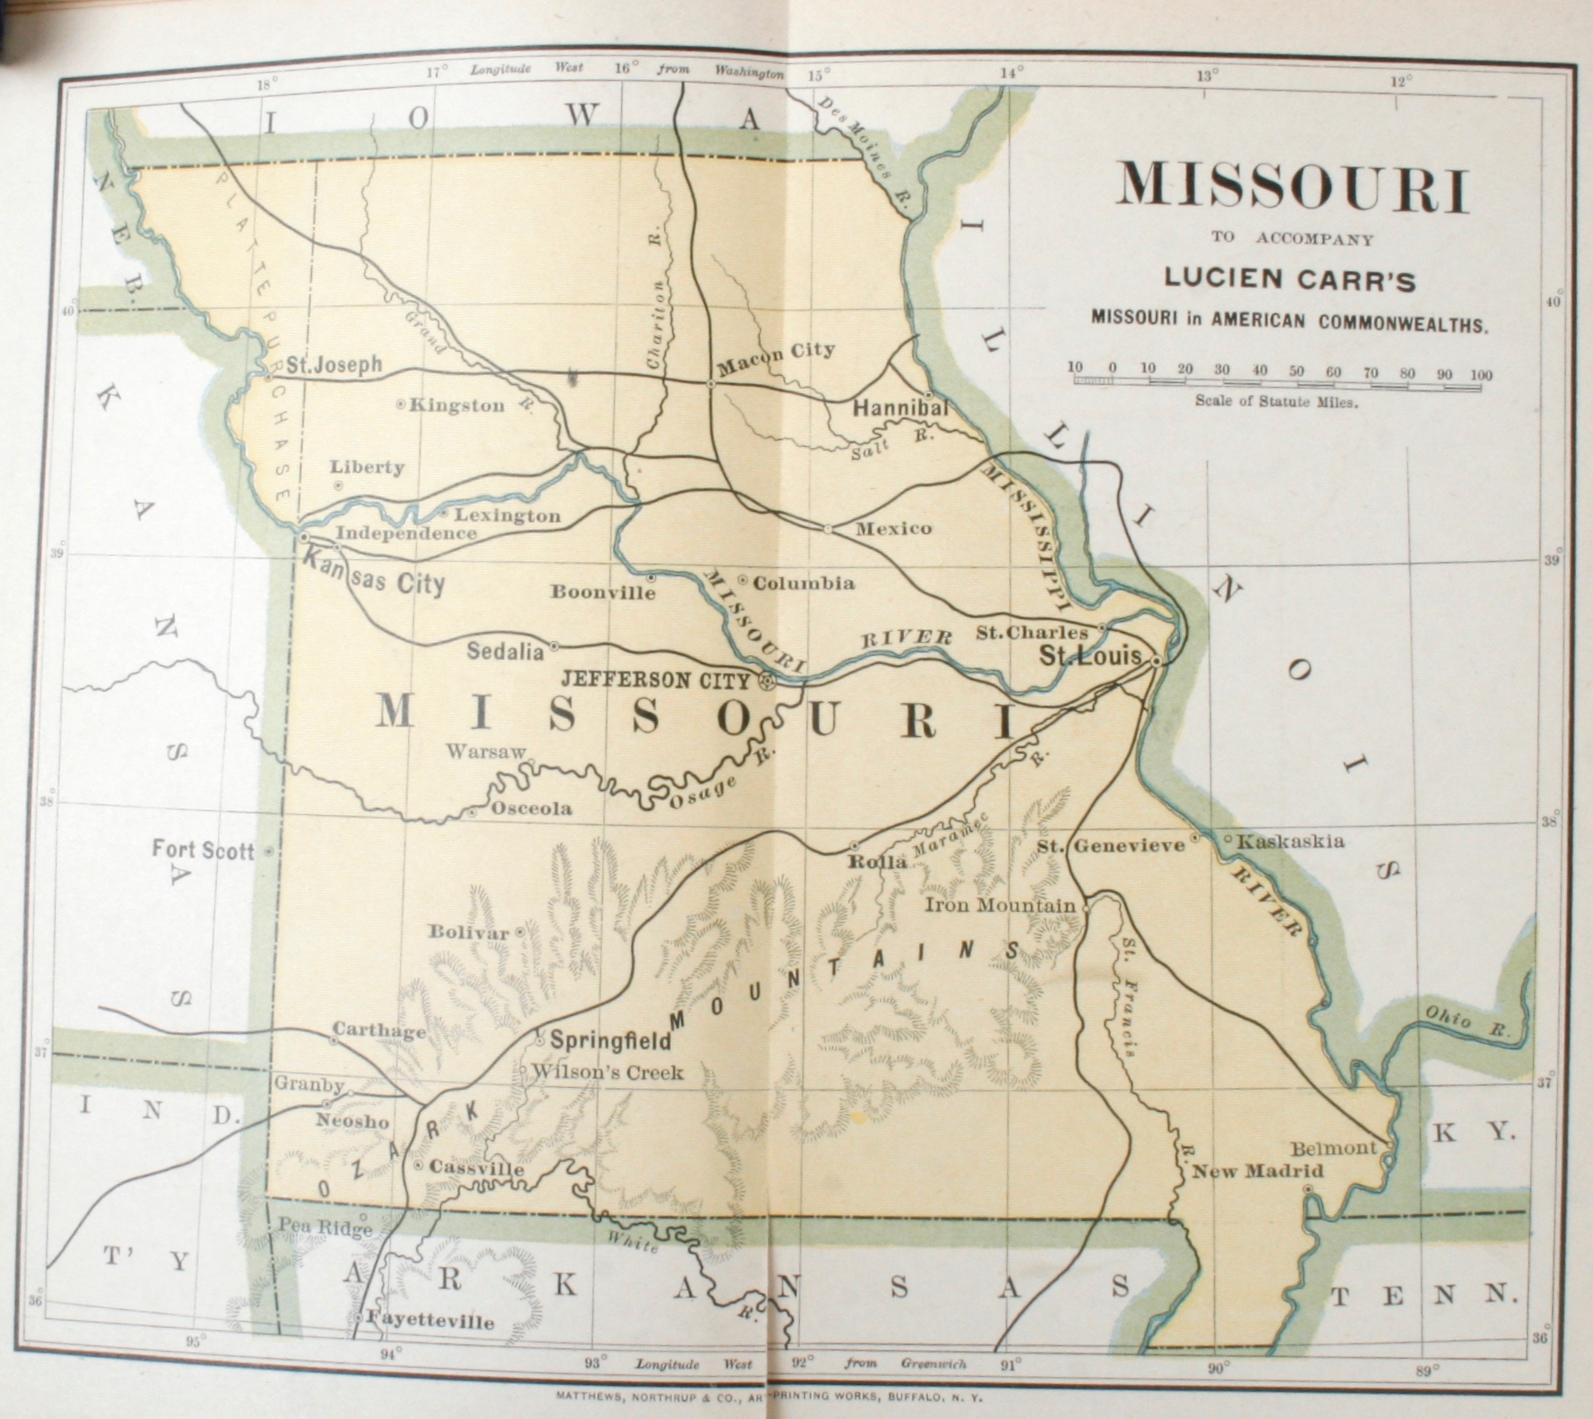 Missouri, a bone of contention by Lucien Carr. Boston and New York: Houghton, Mifflin and Company, 1892. Moroccan and marbleized paper bound hardcover. 377 pp. Pages are uncut. An antique history book on the state of Missouri, one in a series of